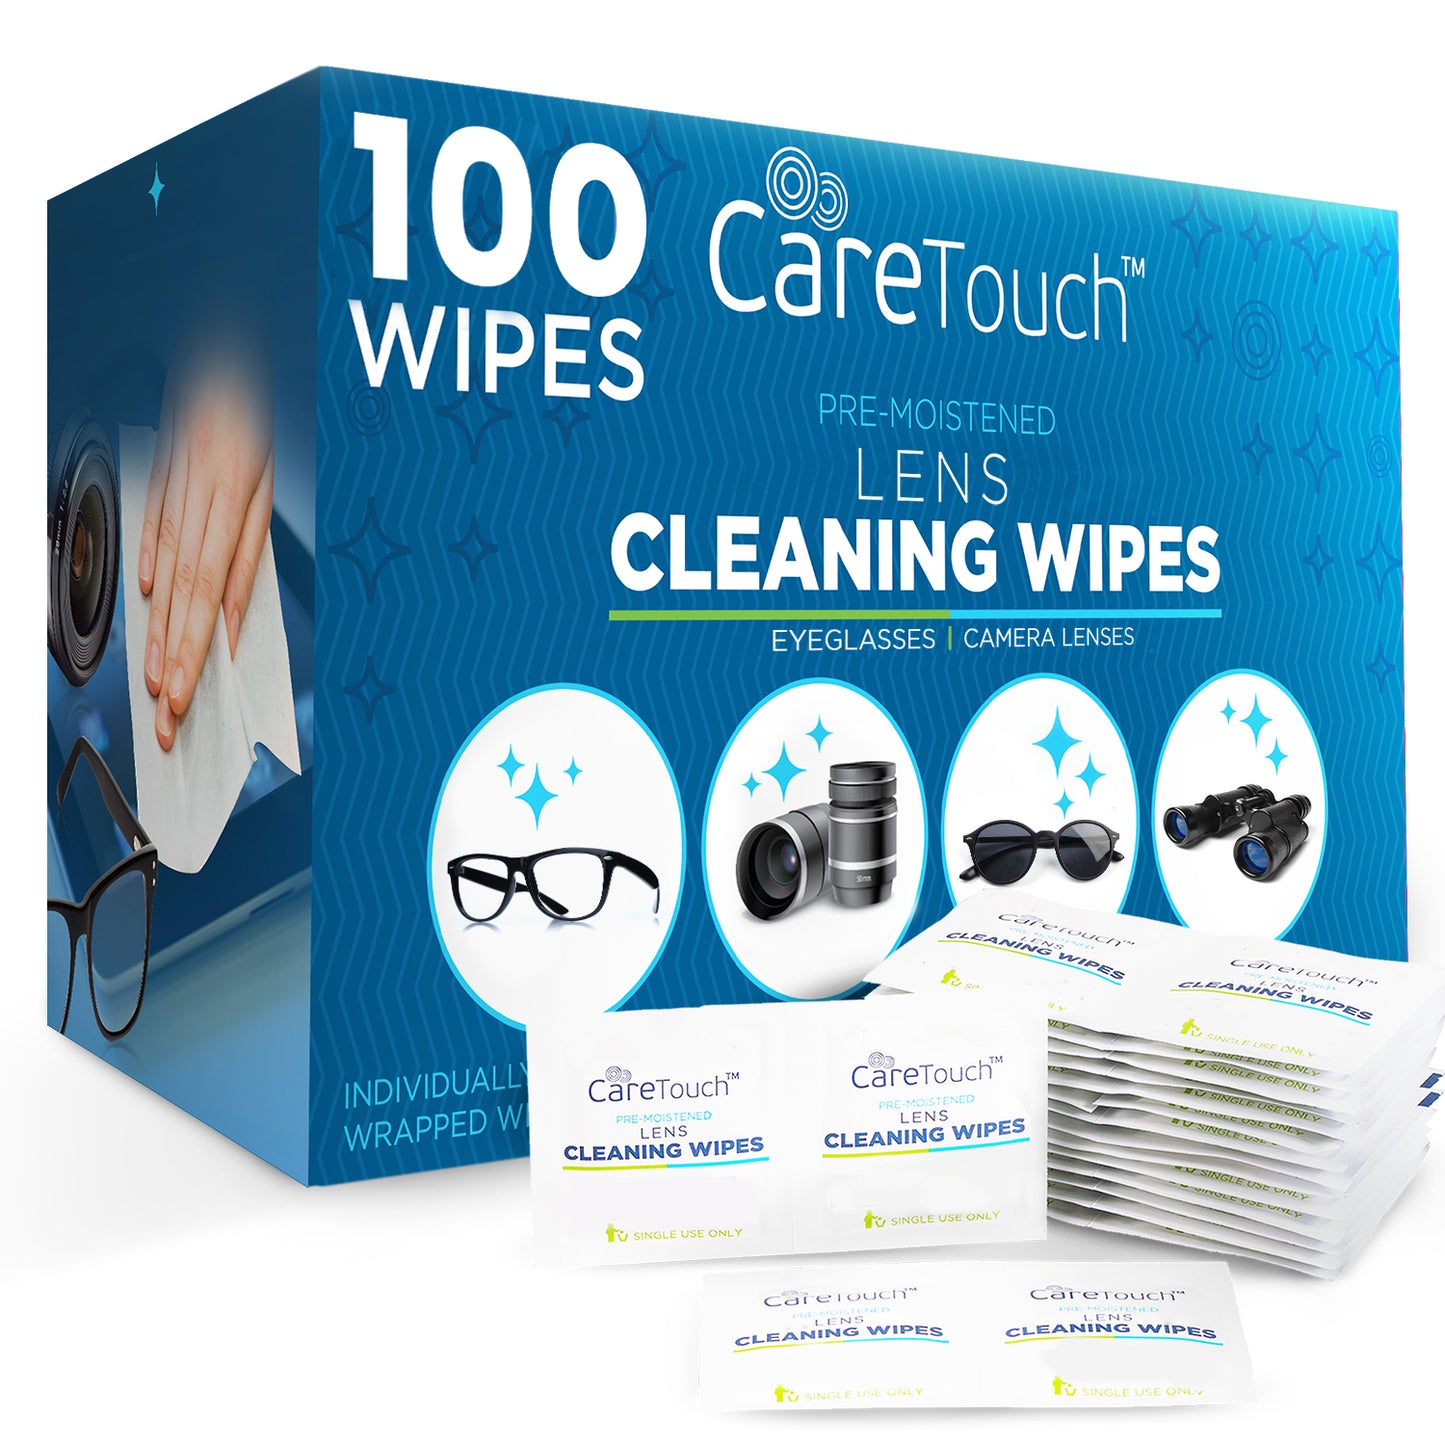 Care Touch Lens Wipes 100ct (Case of 40 units)